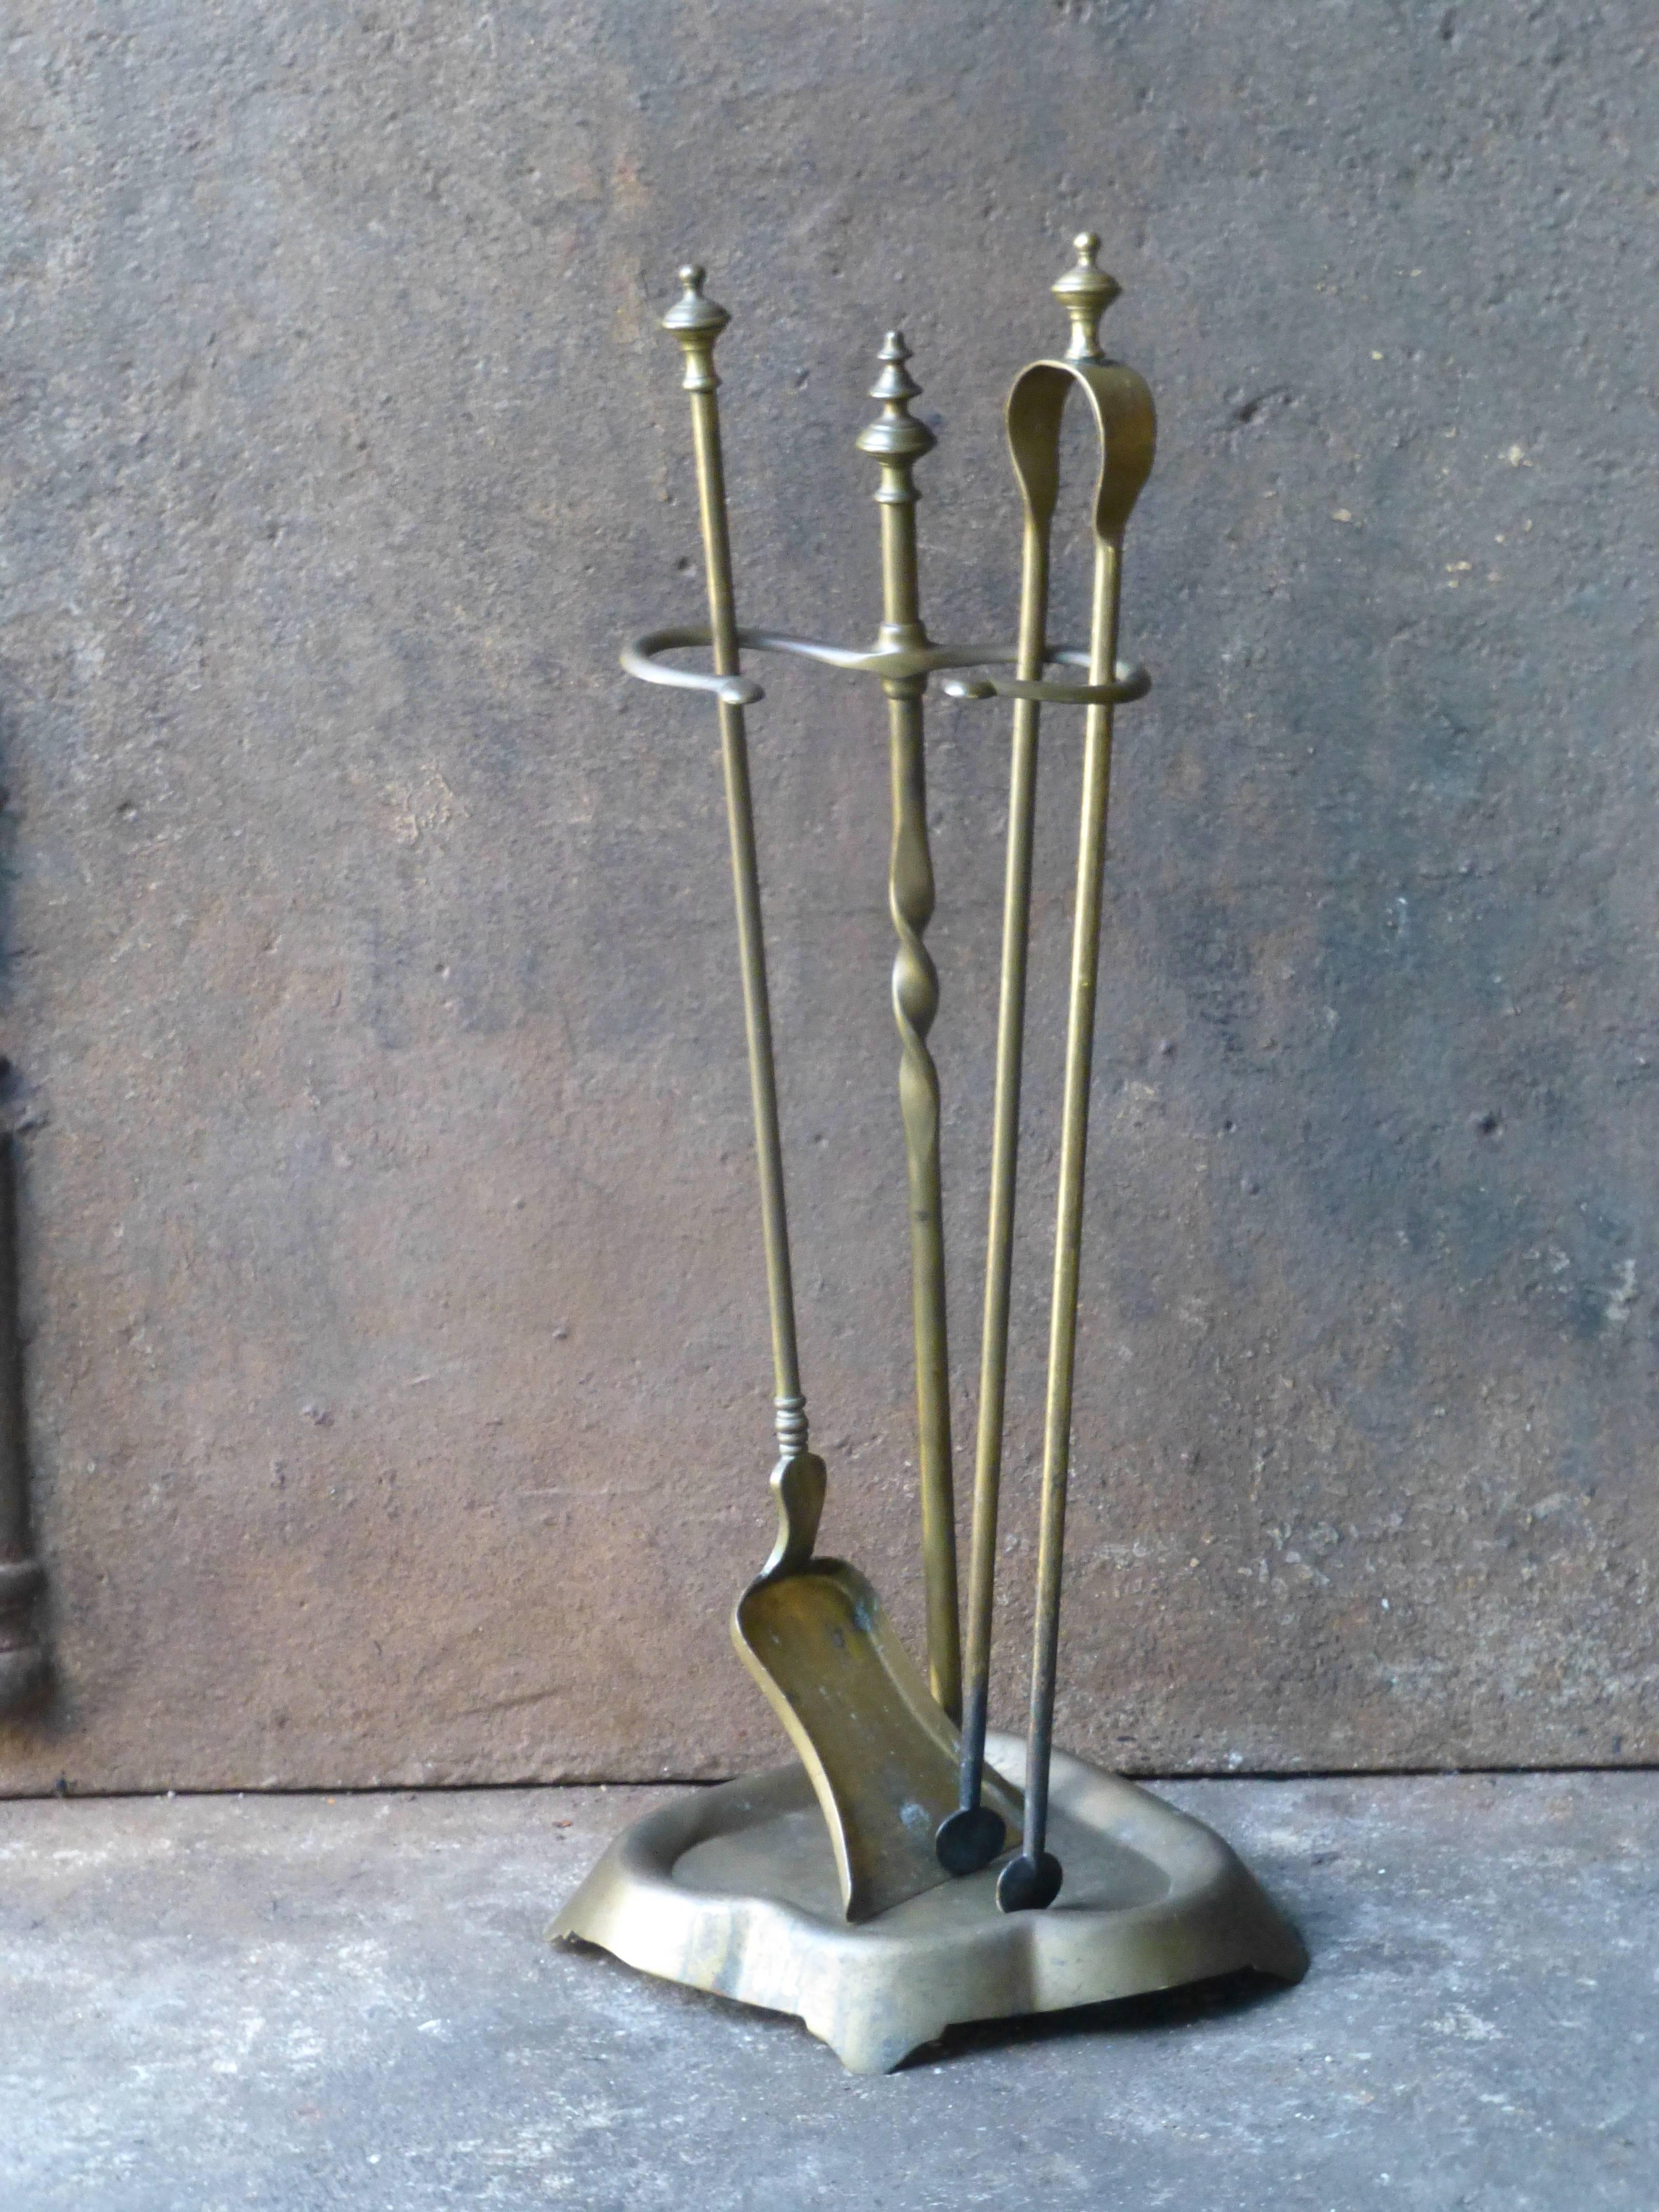 19th century French fireplace irons, fire tools.